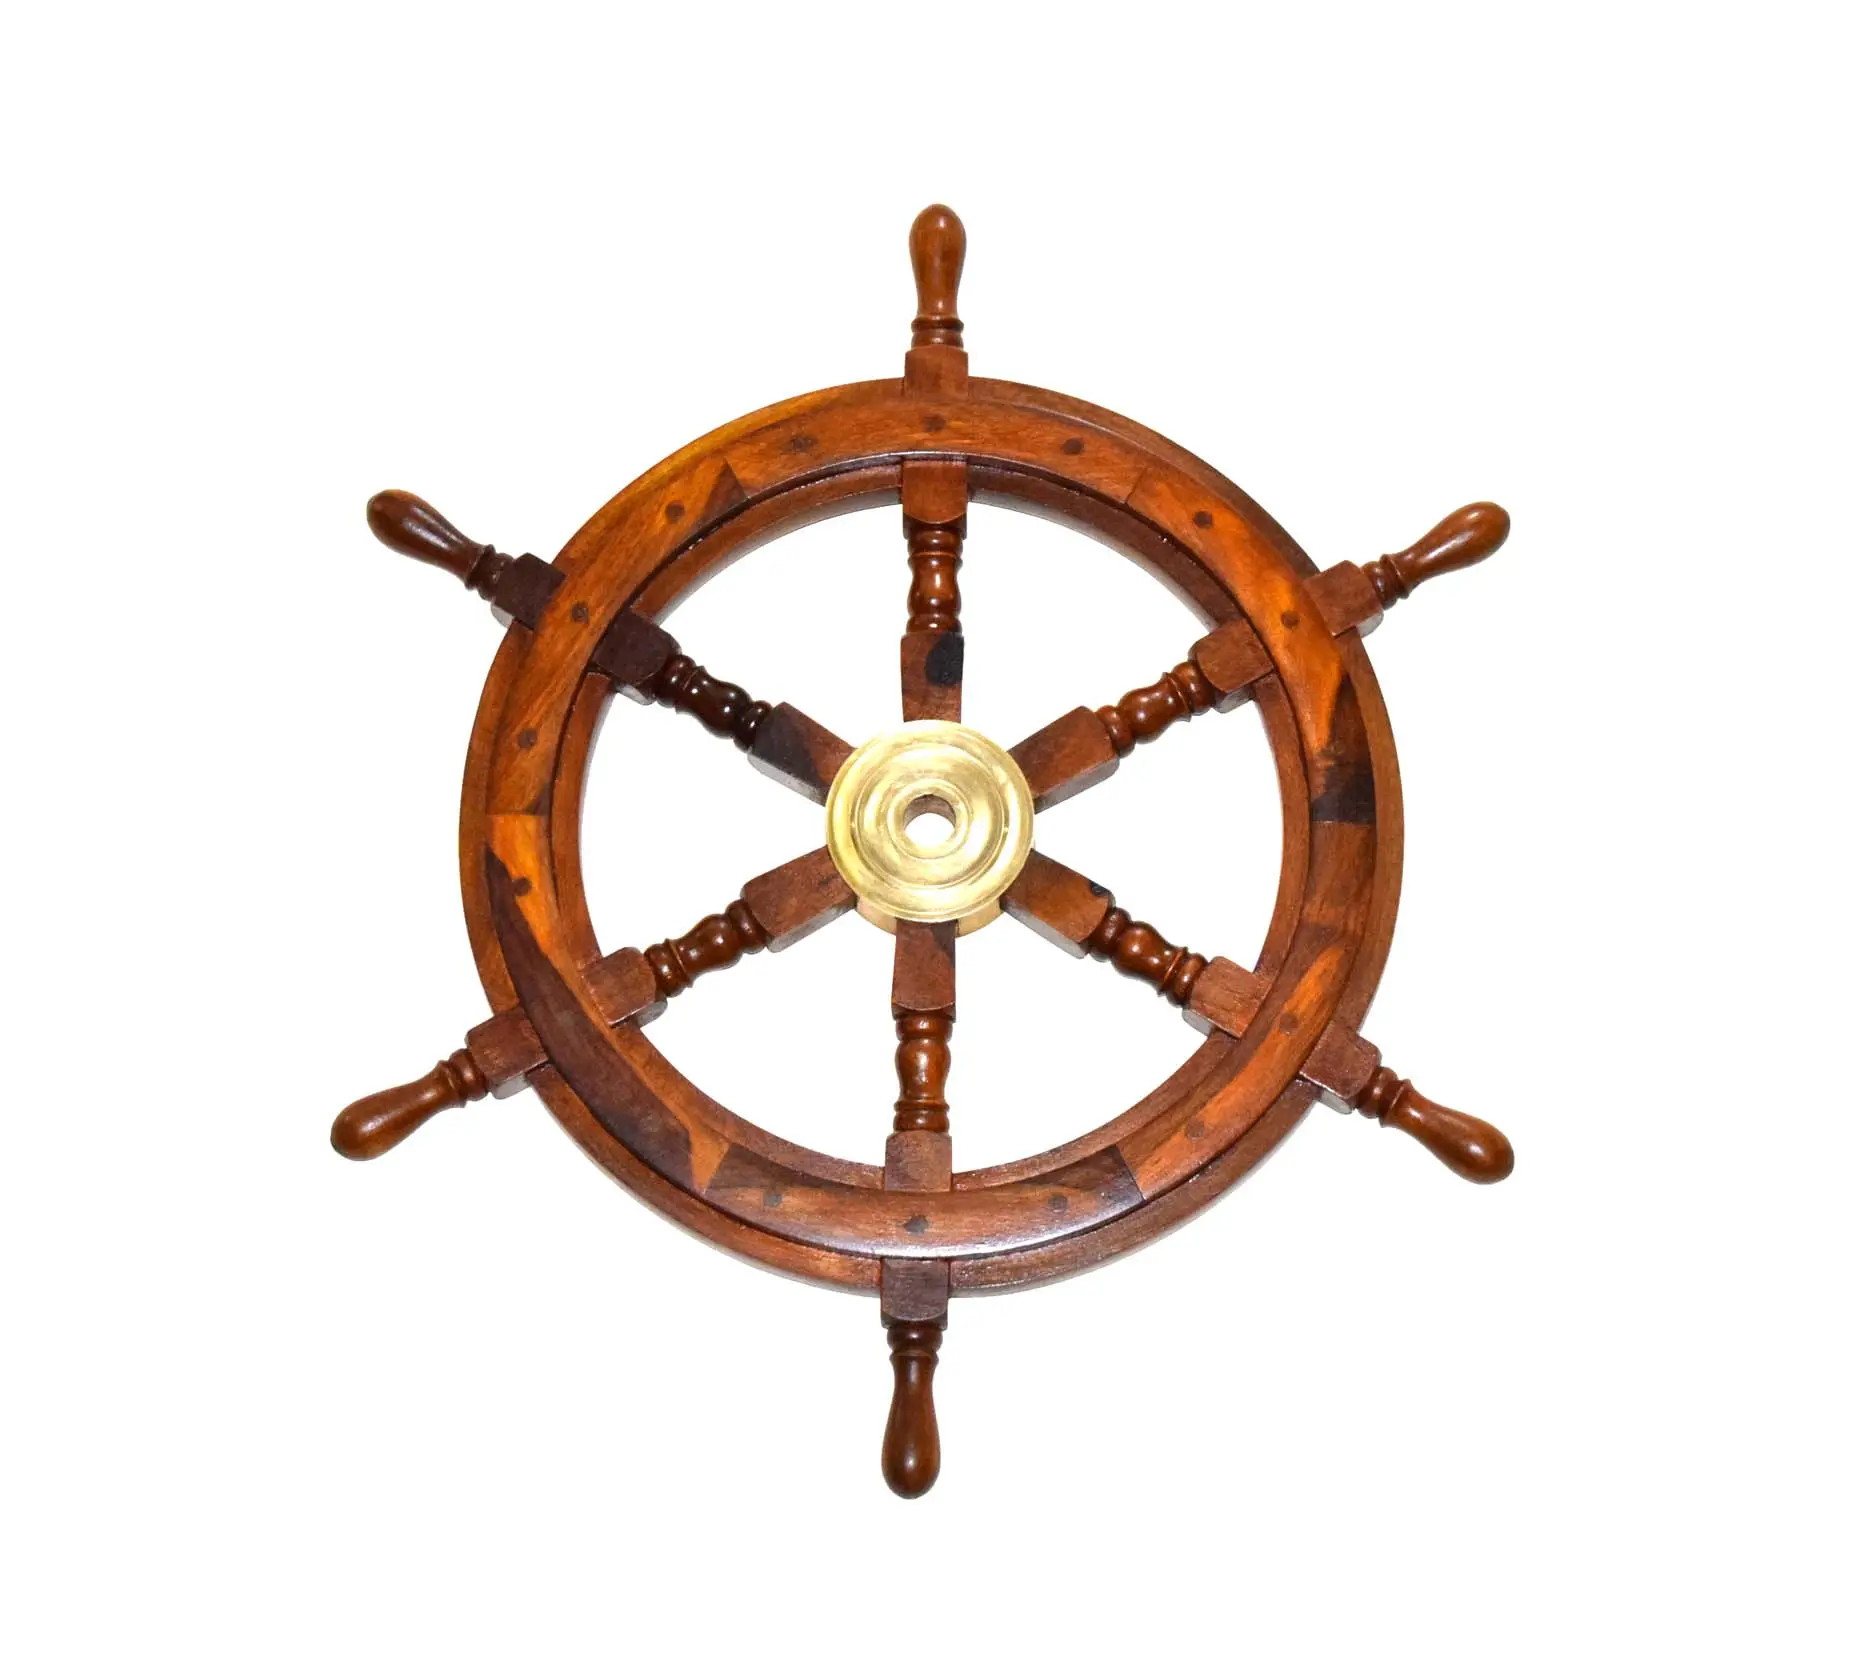 24" Fancy Wood & Brass Showpiece Designer Wall Hanging Ship Wheel Perfect For Home Office Decoration Indian Handicrafts